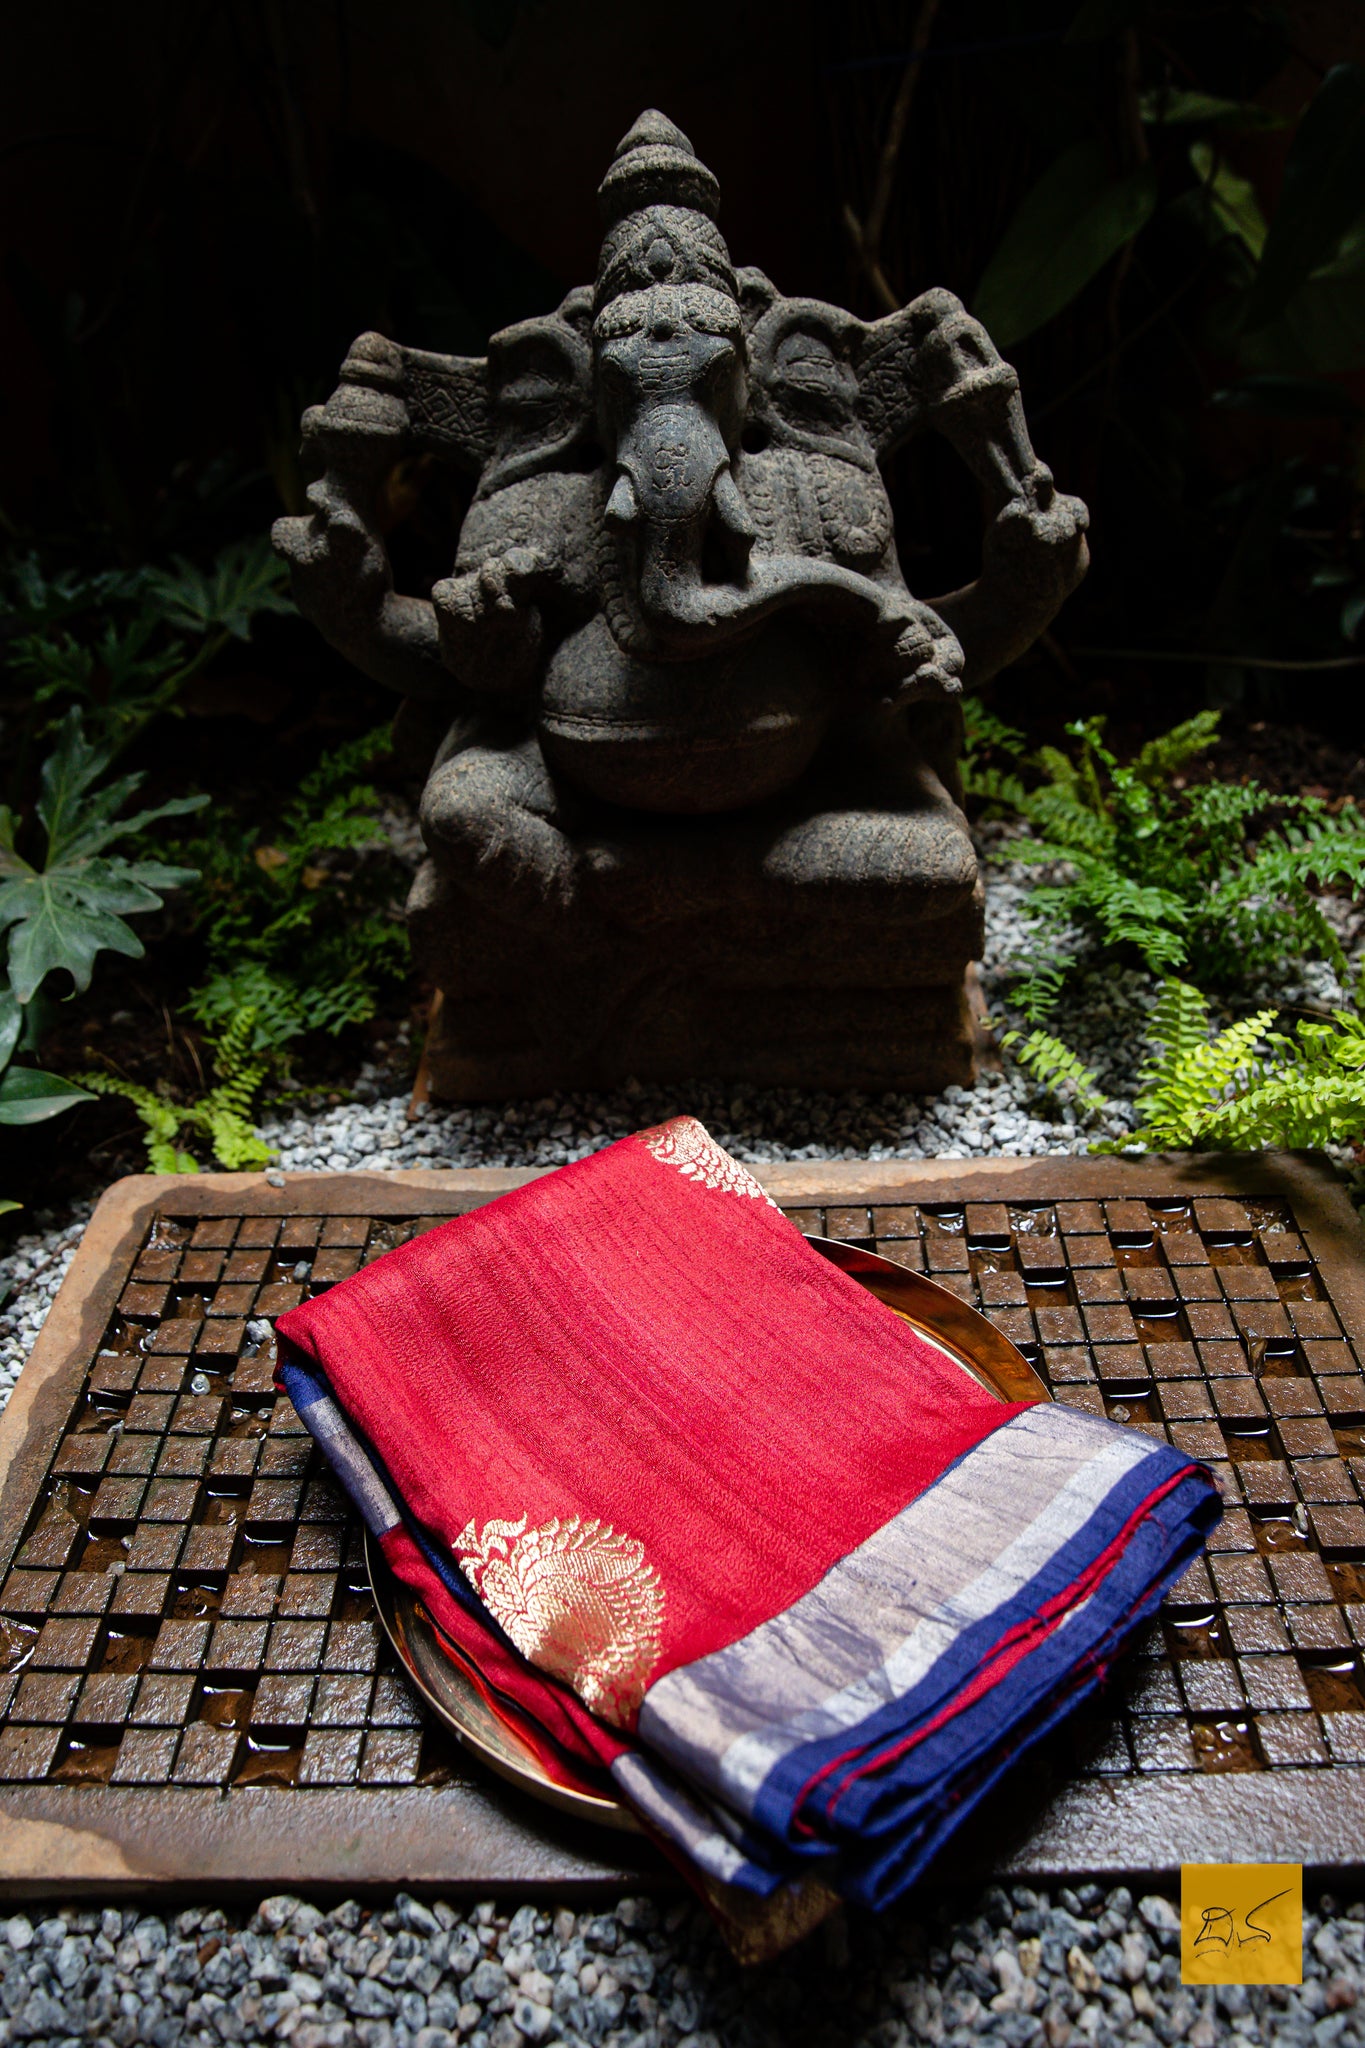 You are the LIGHT!  A banarasi tussar silk handwoven saree with kadhwa buttas. The saree is in maroon and  dark blue tones. A saree which drapes beautifully.